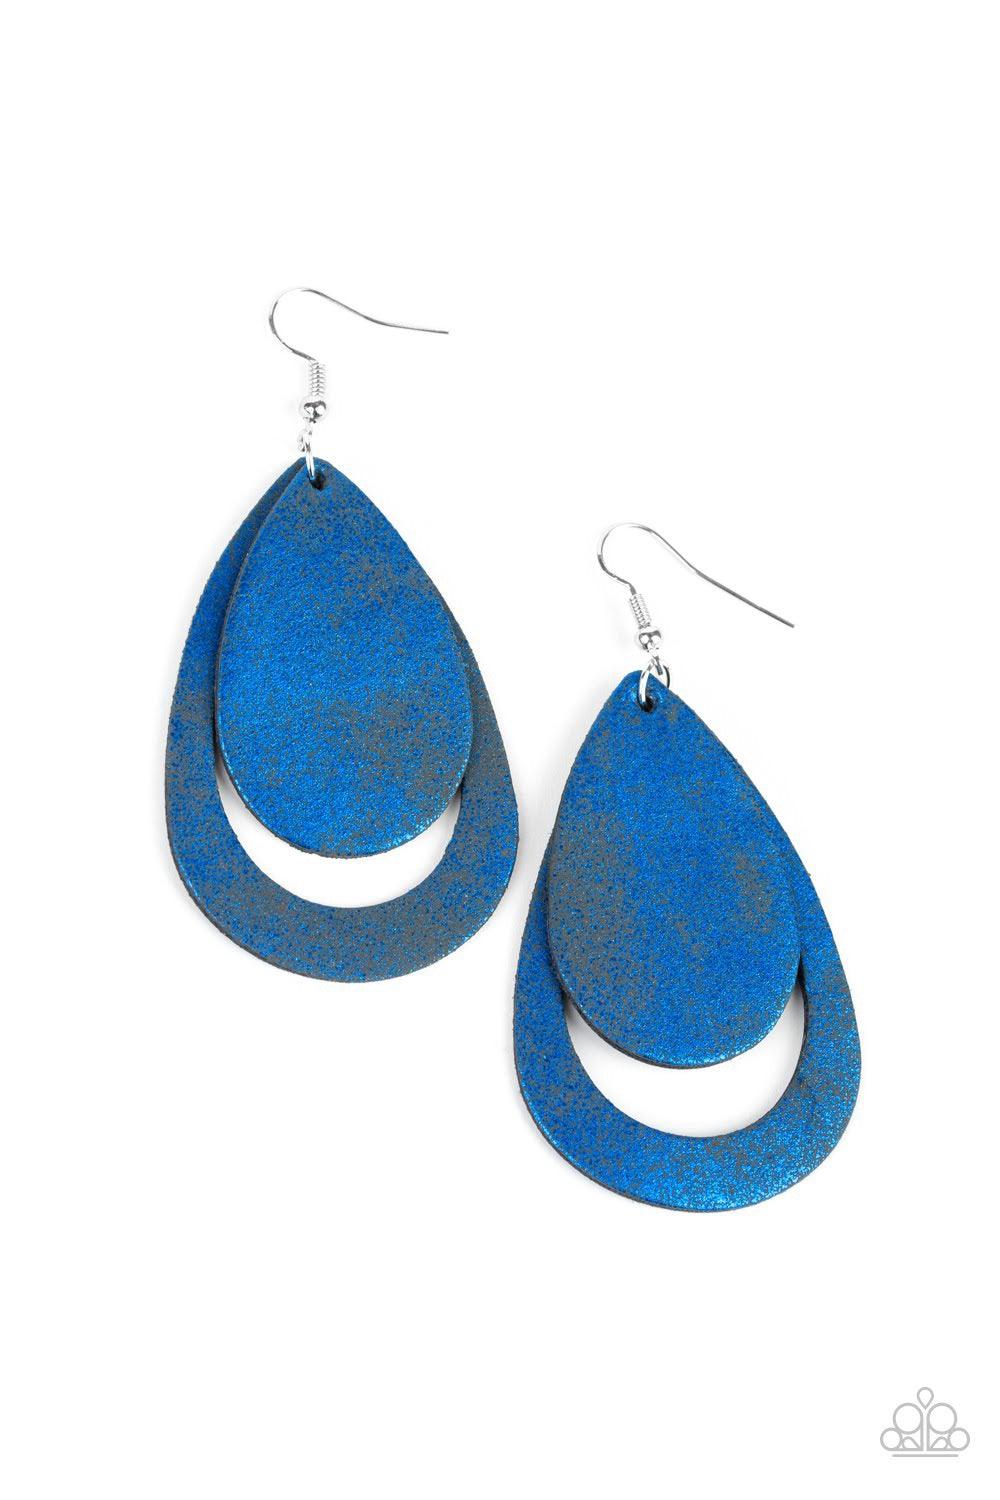 Paparazzi Accessories Fiery Firework - Blue Brushed in a metallic blue finish, sparkling leather teardrops drip from the ear, coalescing into a trendy lure. Earring attaches to a standard fishhook fitting. Jewelry